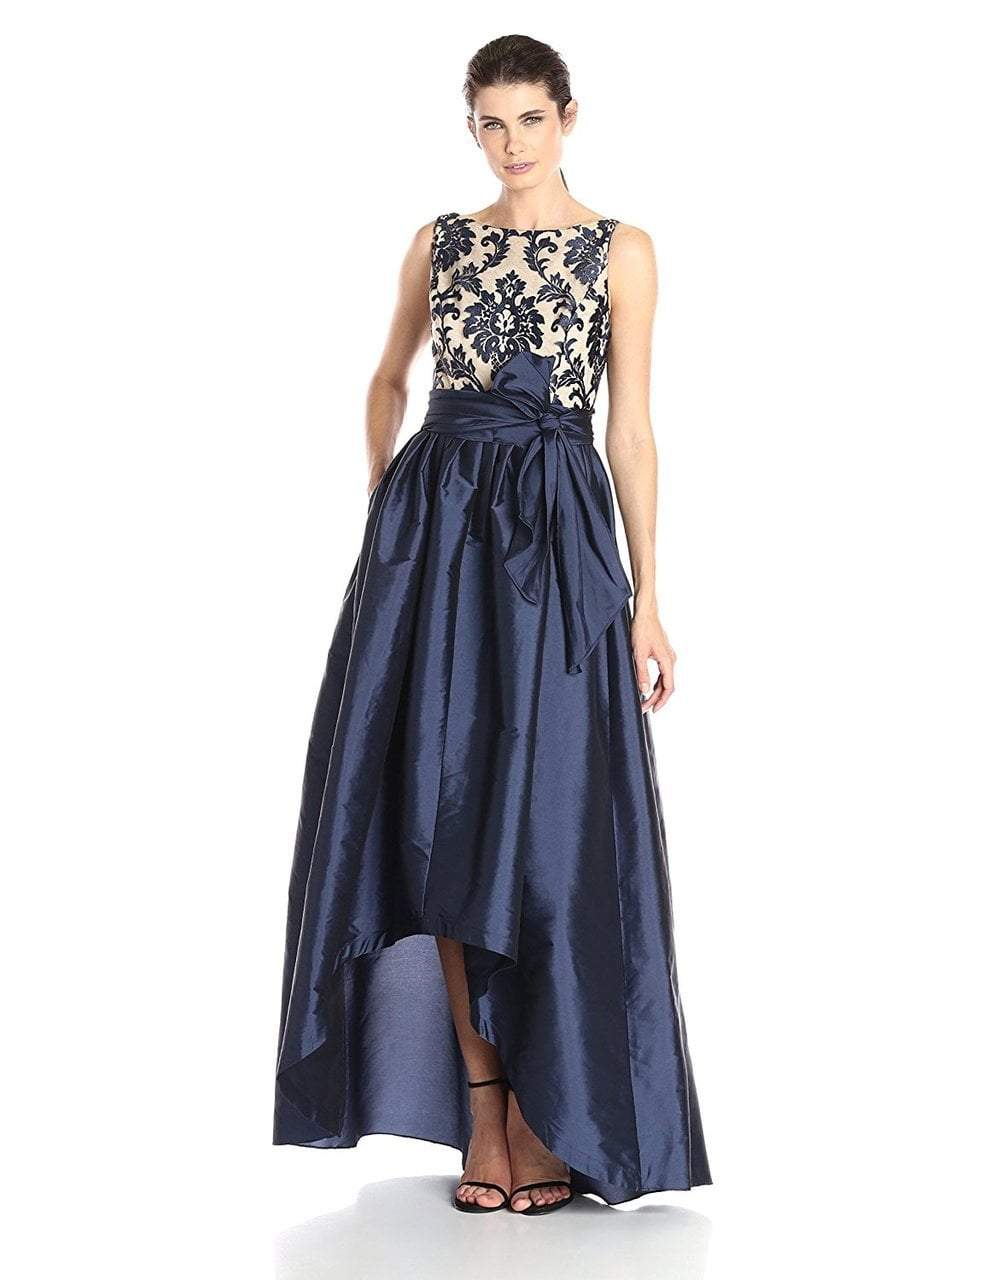 Image of Adrianna Papell - 81928510 Sleeveless Floral Bateau Hi-Low Ballgown